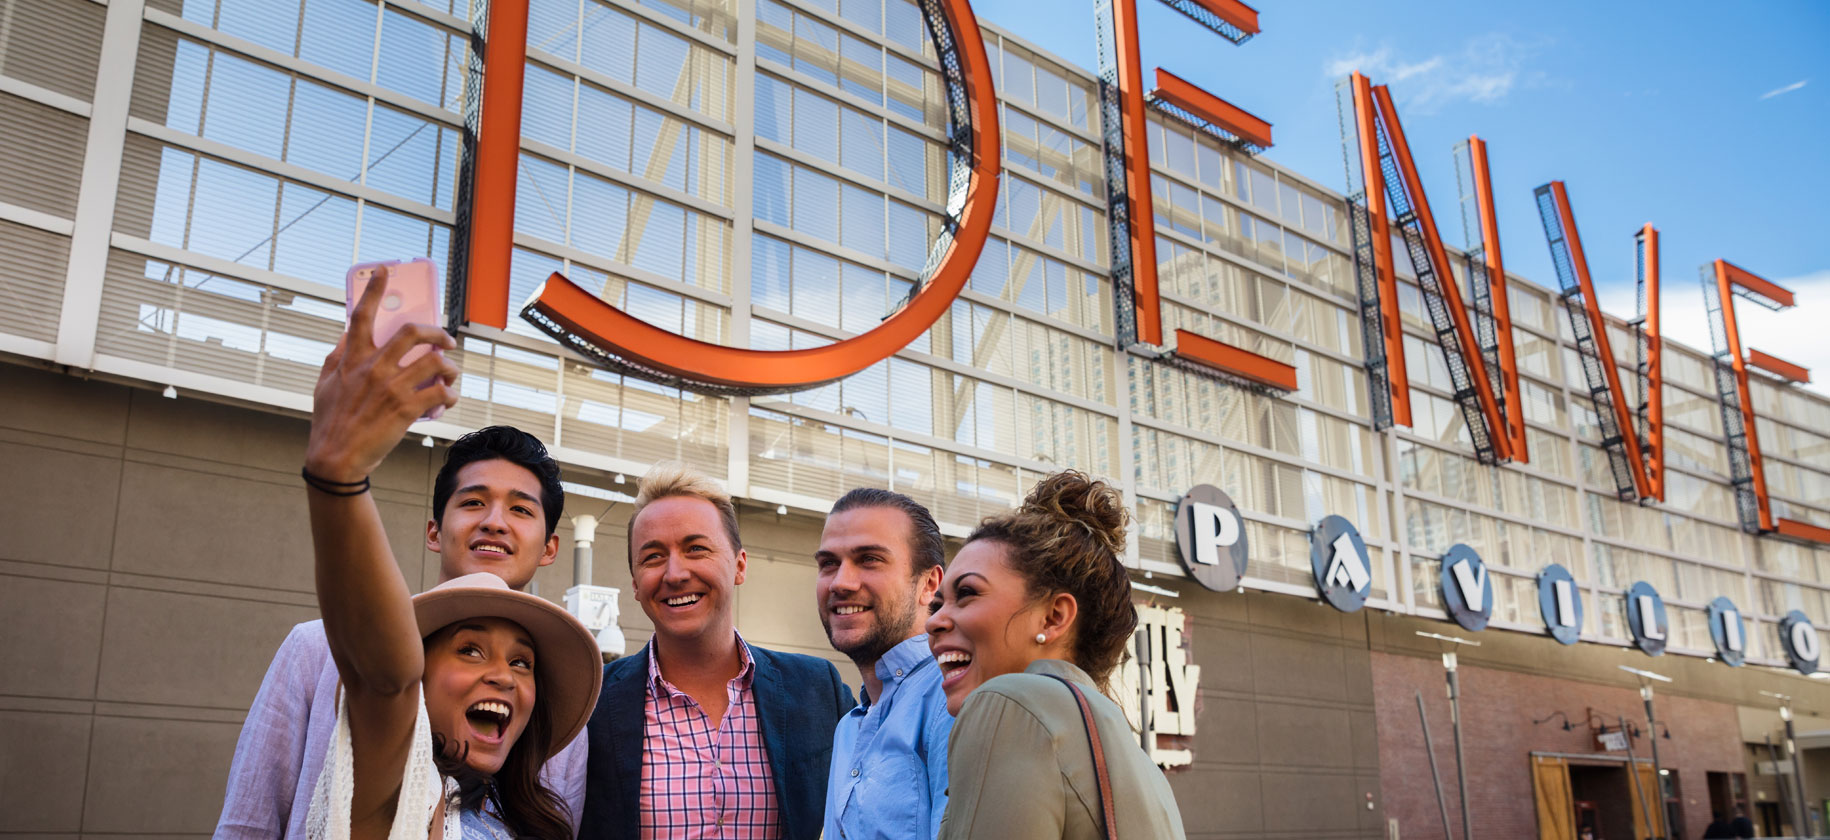 image of people taking a selfie in front of the Denver Pavilions sign